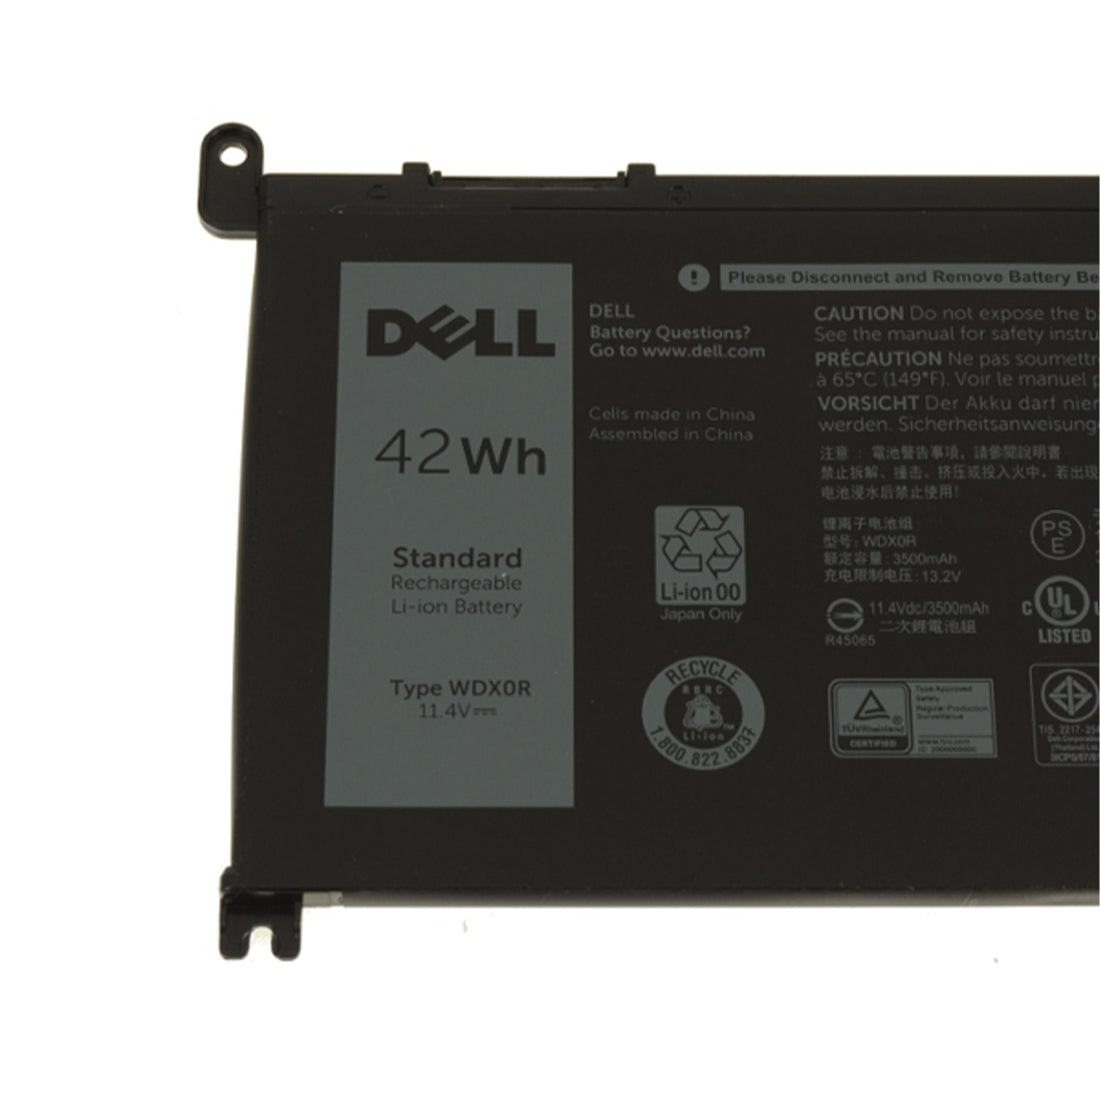 Dell Original 3500mAh 11.4V 42WHR 3-Cell Replacement Laptop Battery for Inspiron 15 7560